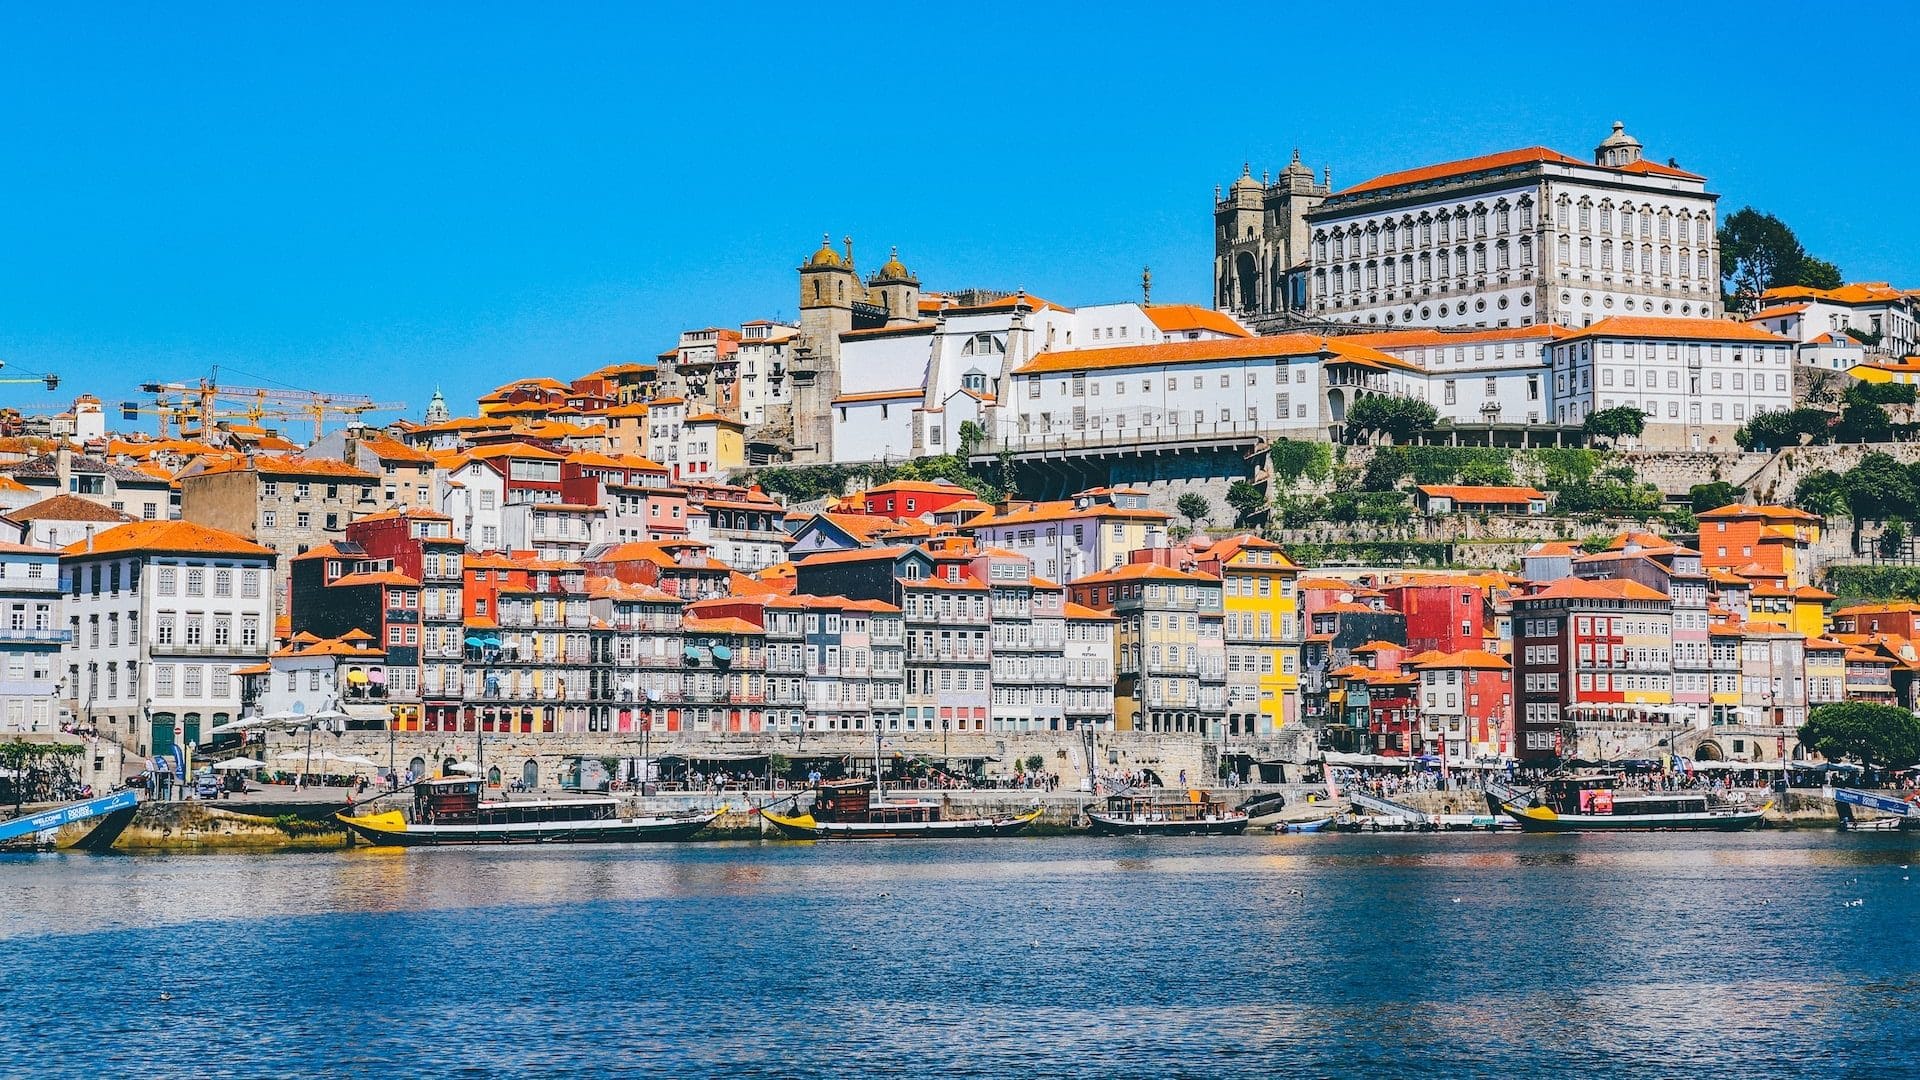 Comprising the centermost areas of the city, União de Freguesias do Centro is home to many of the Portuguese city's attractions, museums, and hotels